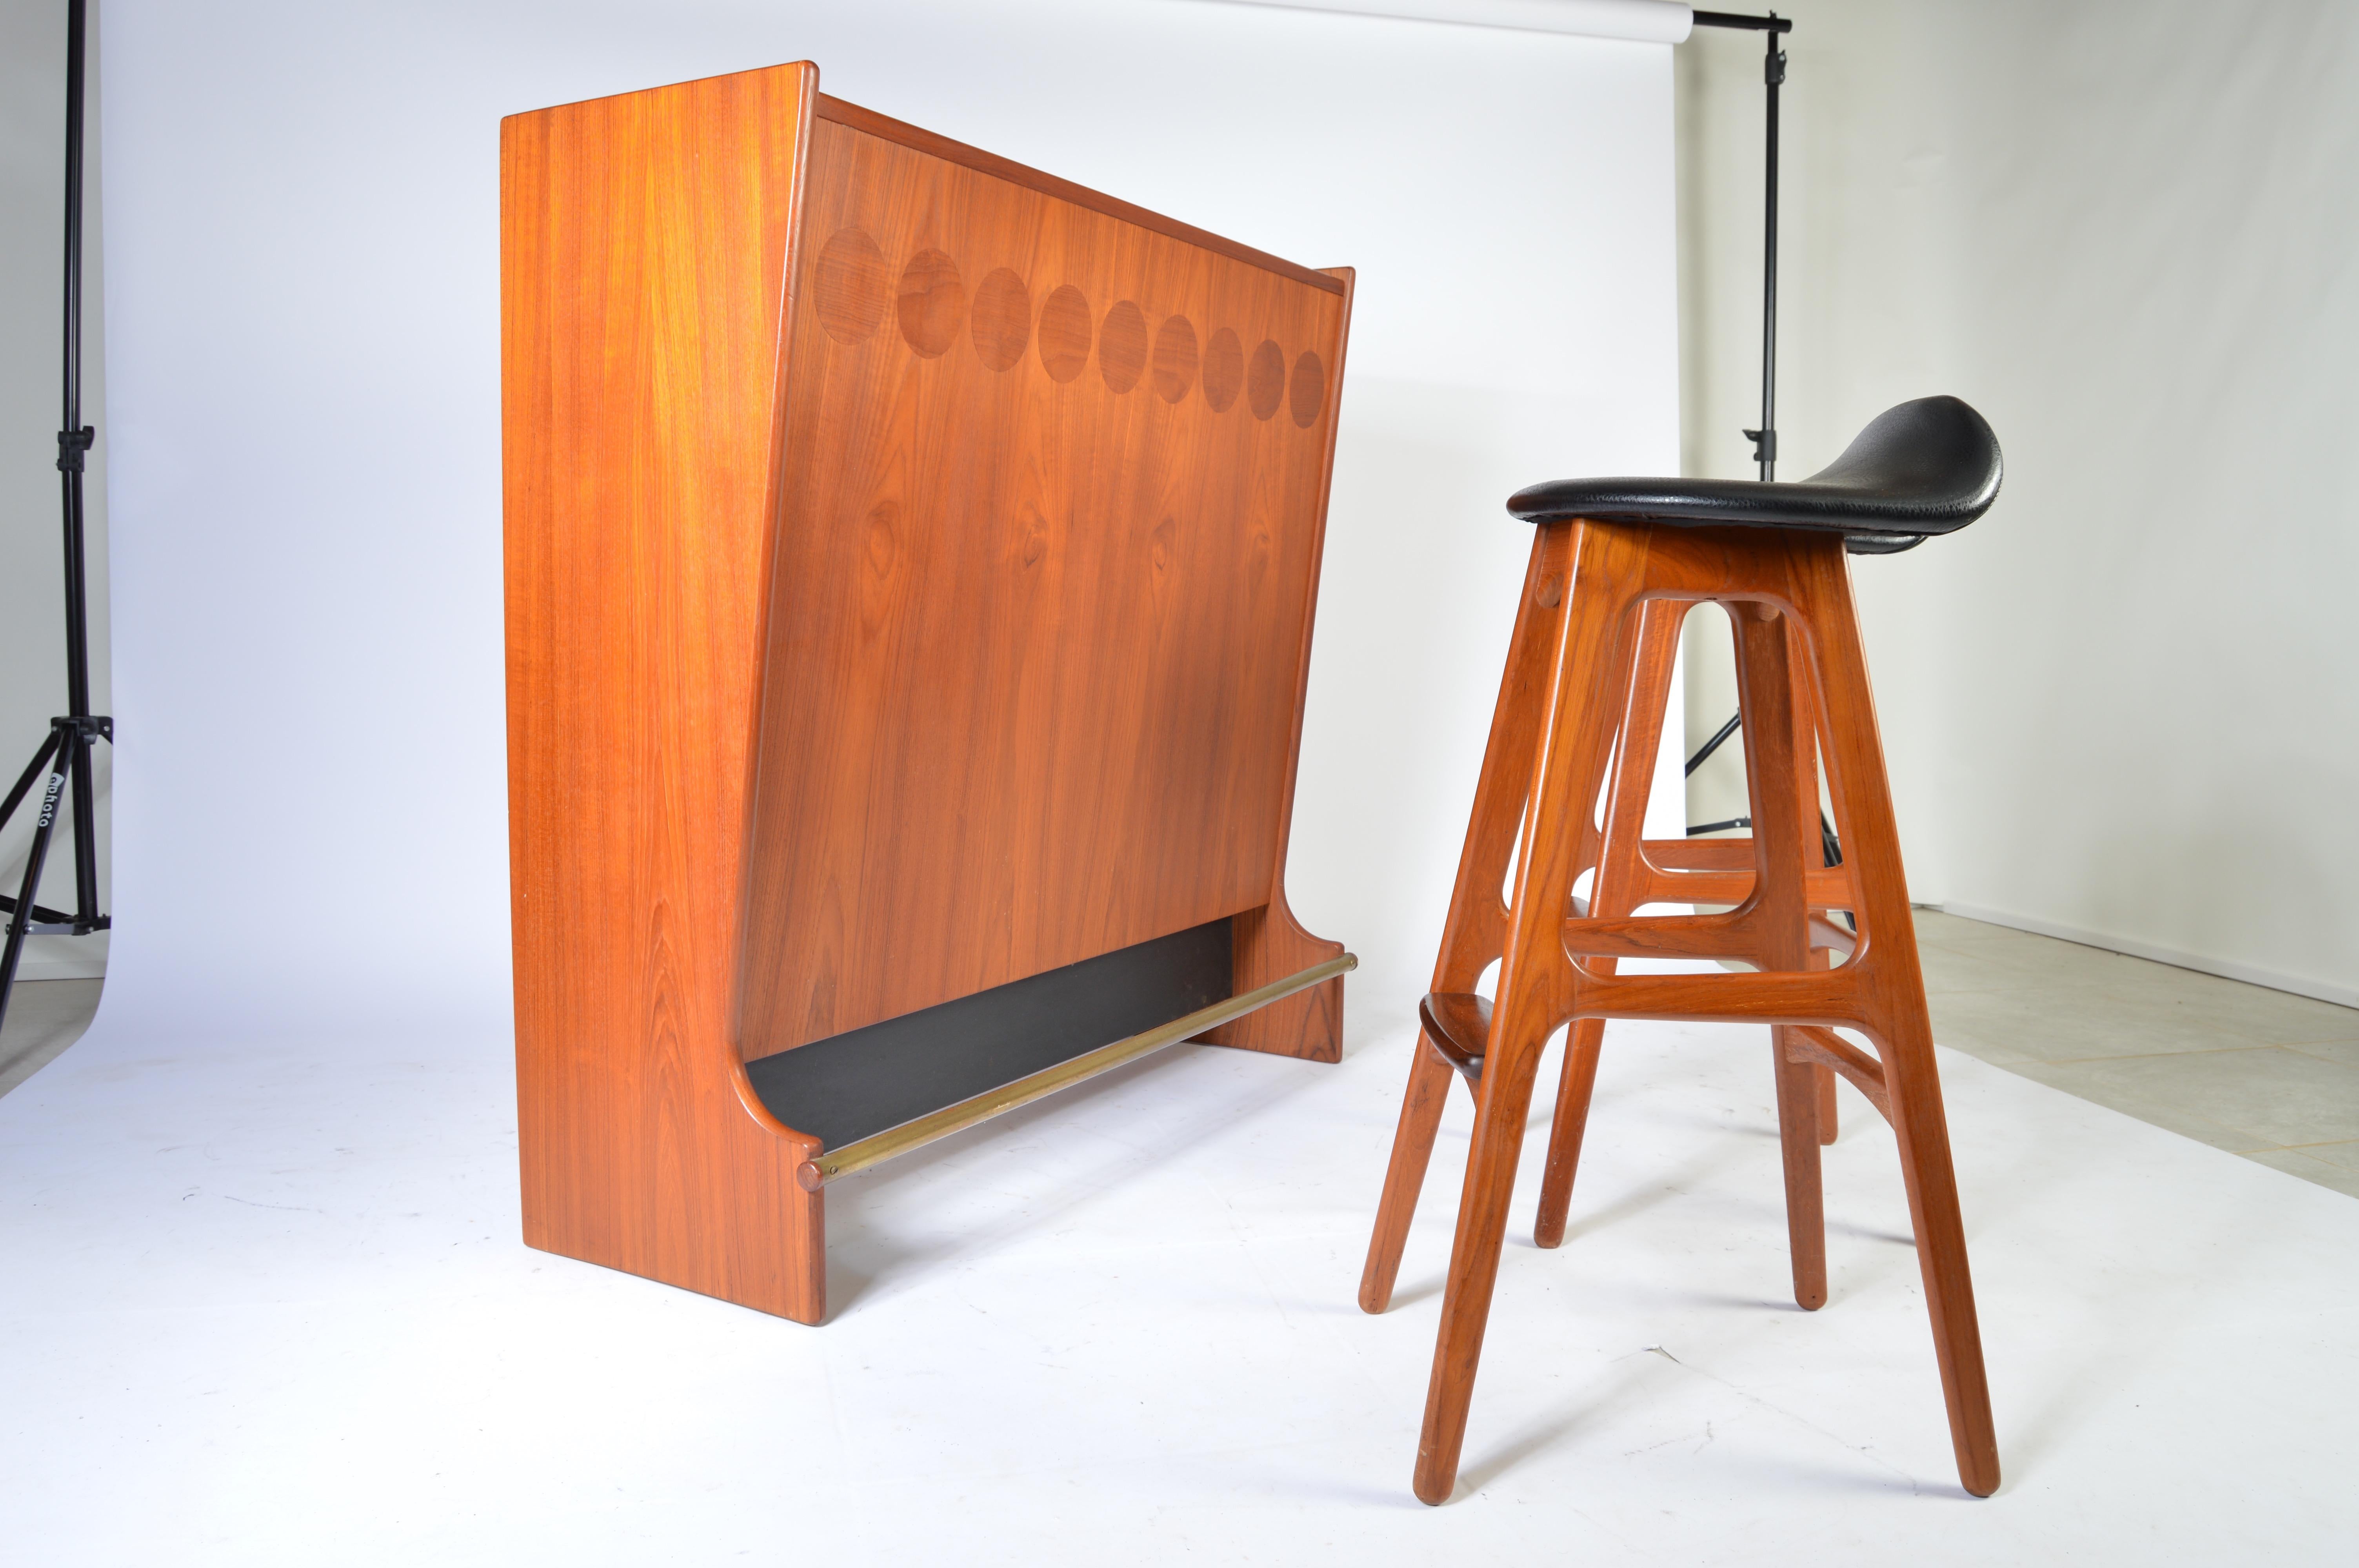 Teak dry bar designed by Johannes Andersen for Skanning and Son with two Erik Buch teak barstools having solid rosewood footrests. The bar features a brass foot rail with teak caps at both ends. Beautiful condition throughout,
circa 1960.

Bar